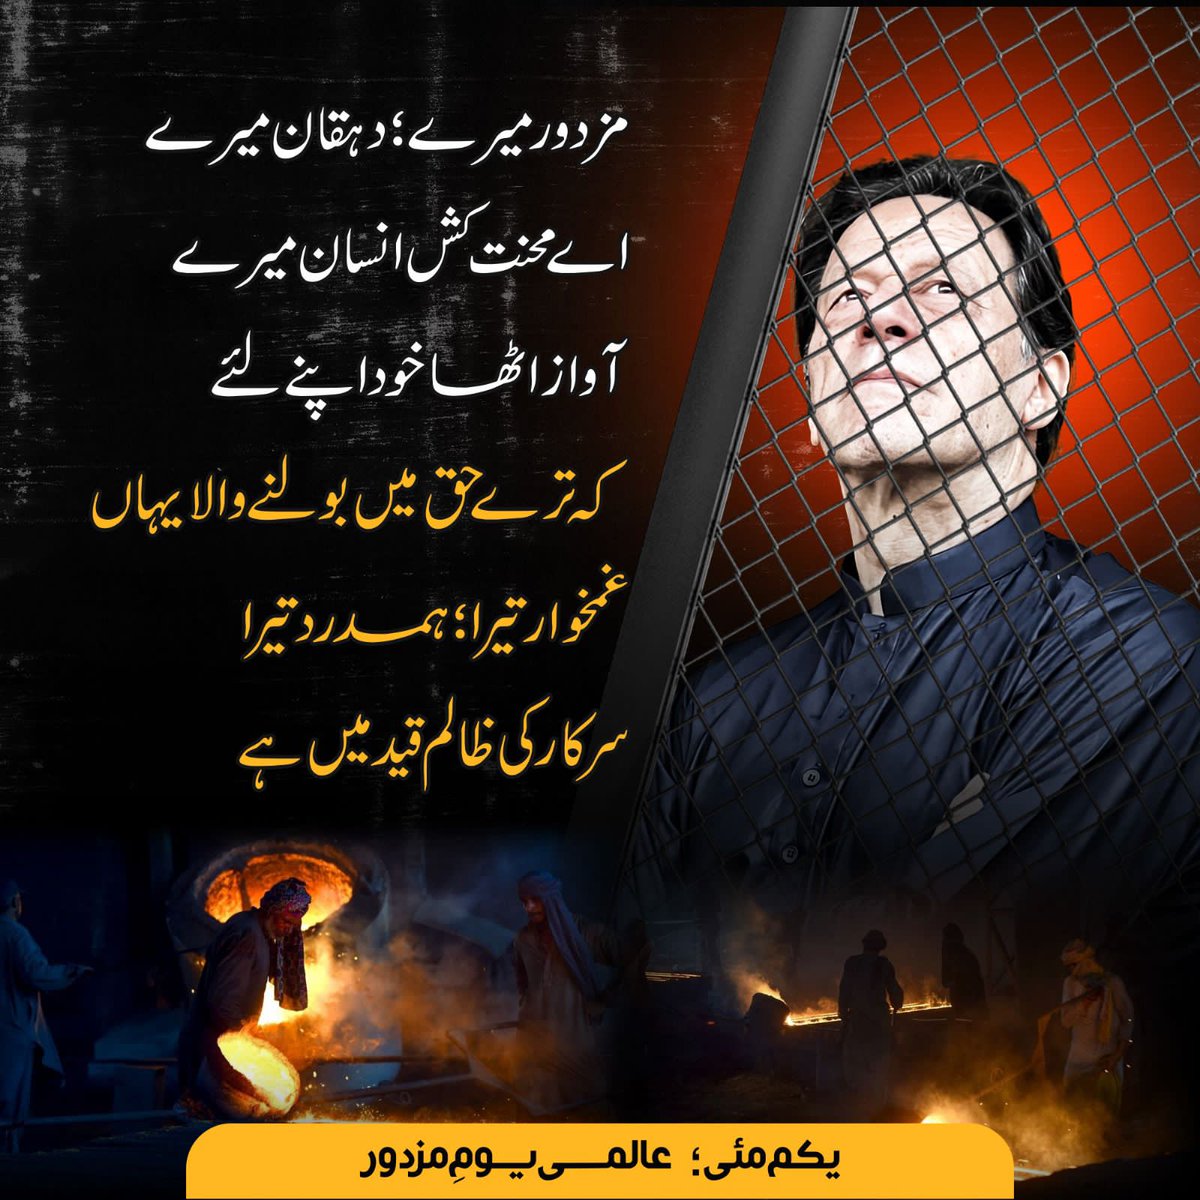 Imran Khan is such a leader that even when he went to Saudi Arabia, he did not ask for anything for himself, but he asked for the release of the poor workers of his country & today the poor's friend leader is in jail for 270 days ! #مفاہمت_نہیں_مزاحمت_کرو #مداخلت_ہوتی_ہے